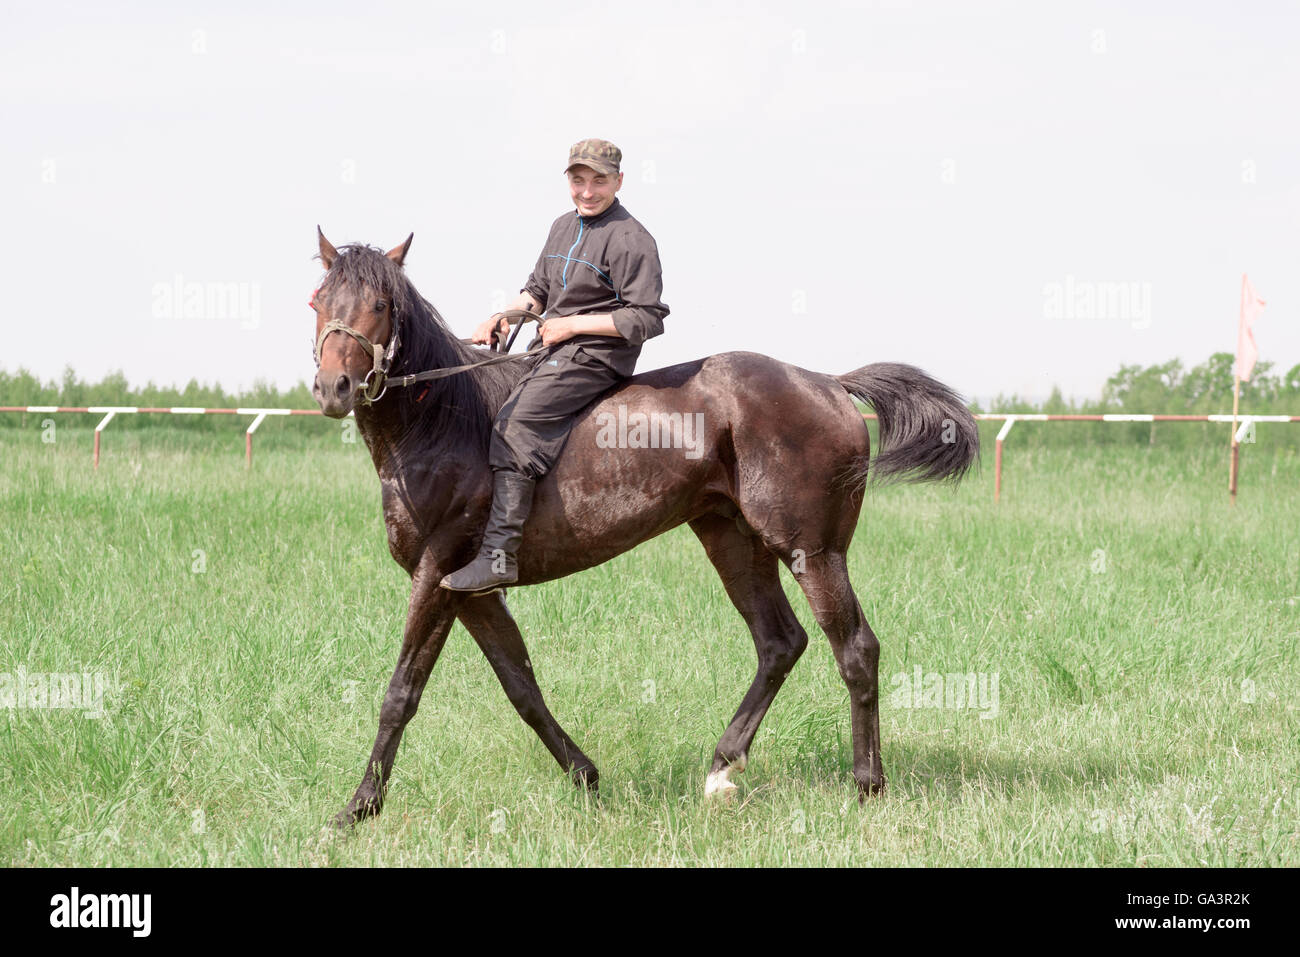 Man riding a brown horse outside without a saddle or safety hat Stock Photo